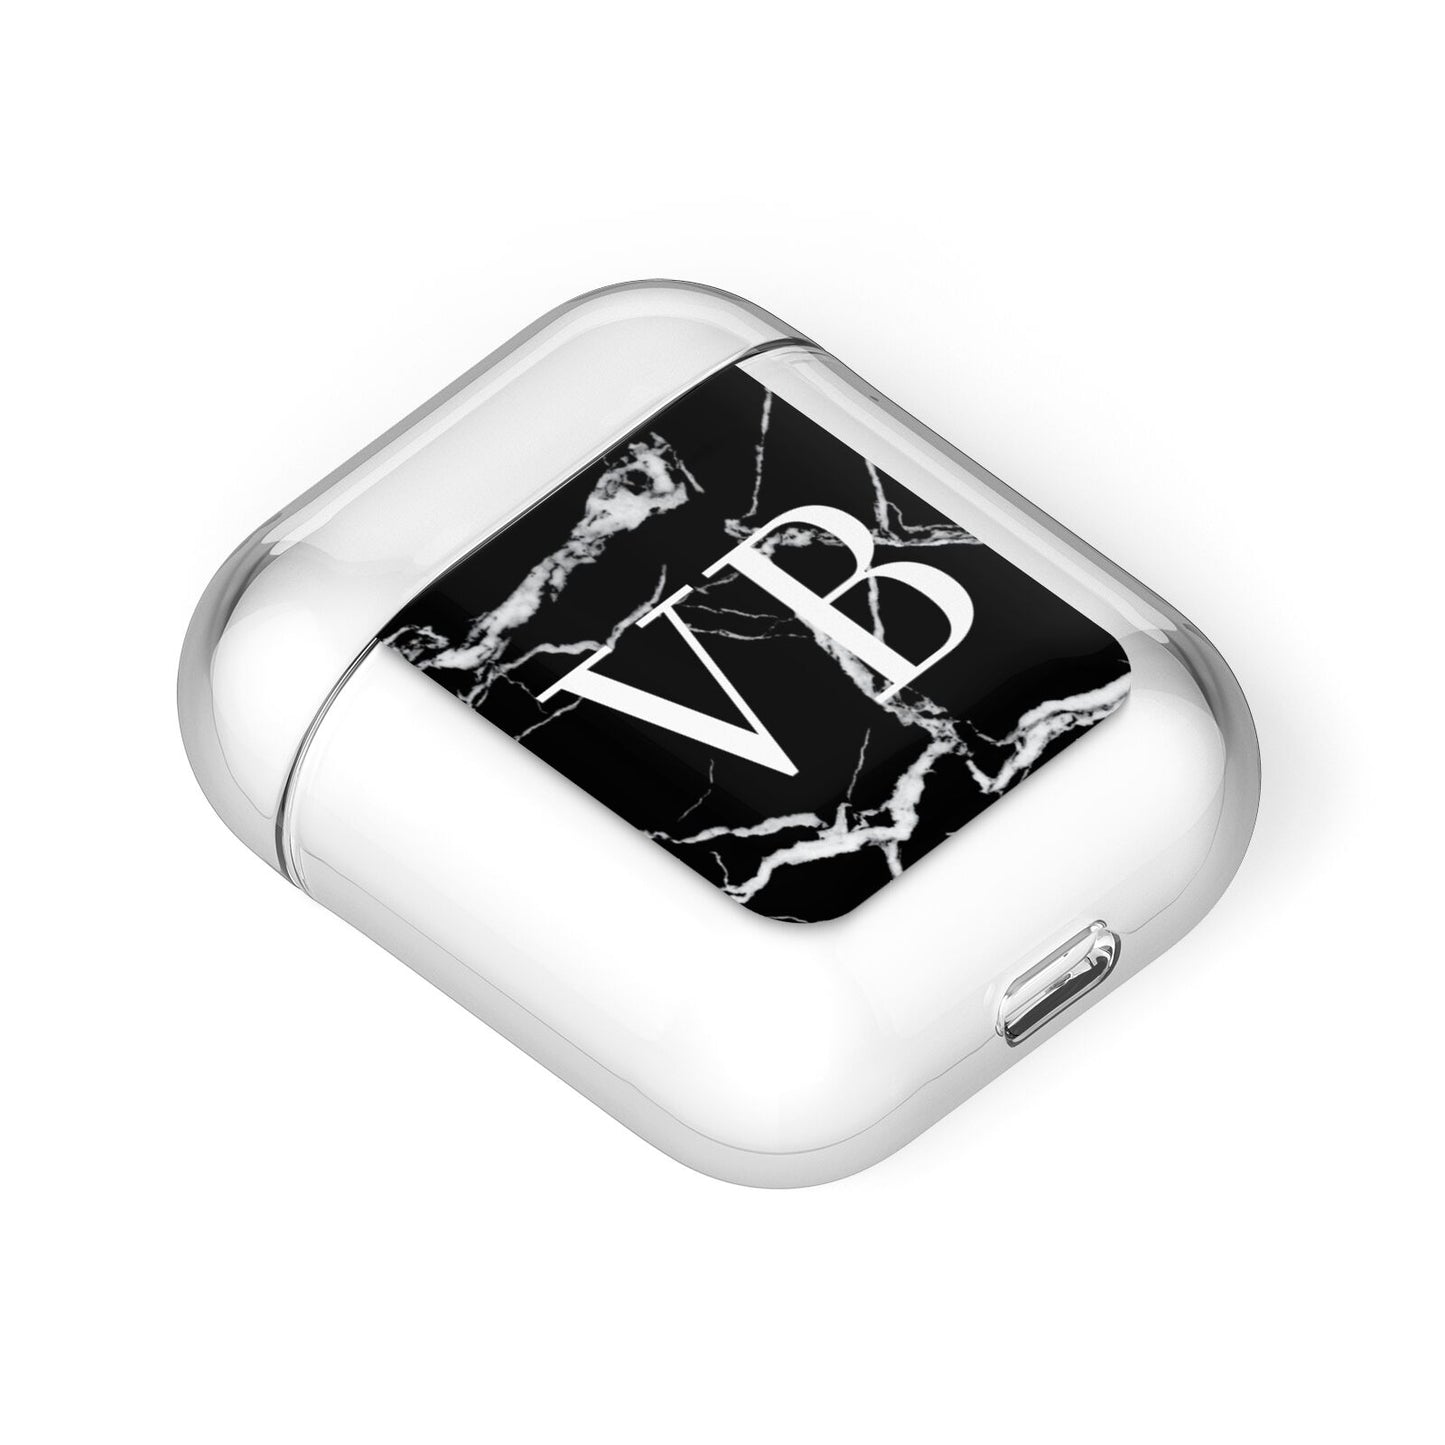 Personalised Black Marble Effect Monogram AirPods Case Laid Flat